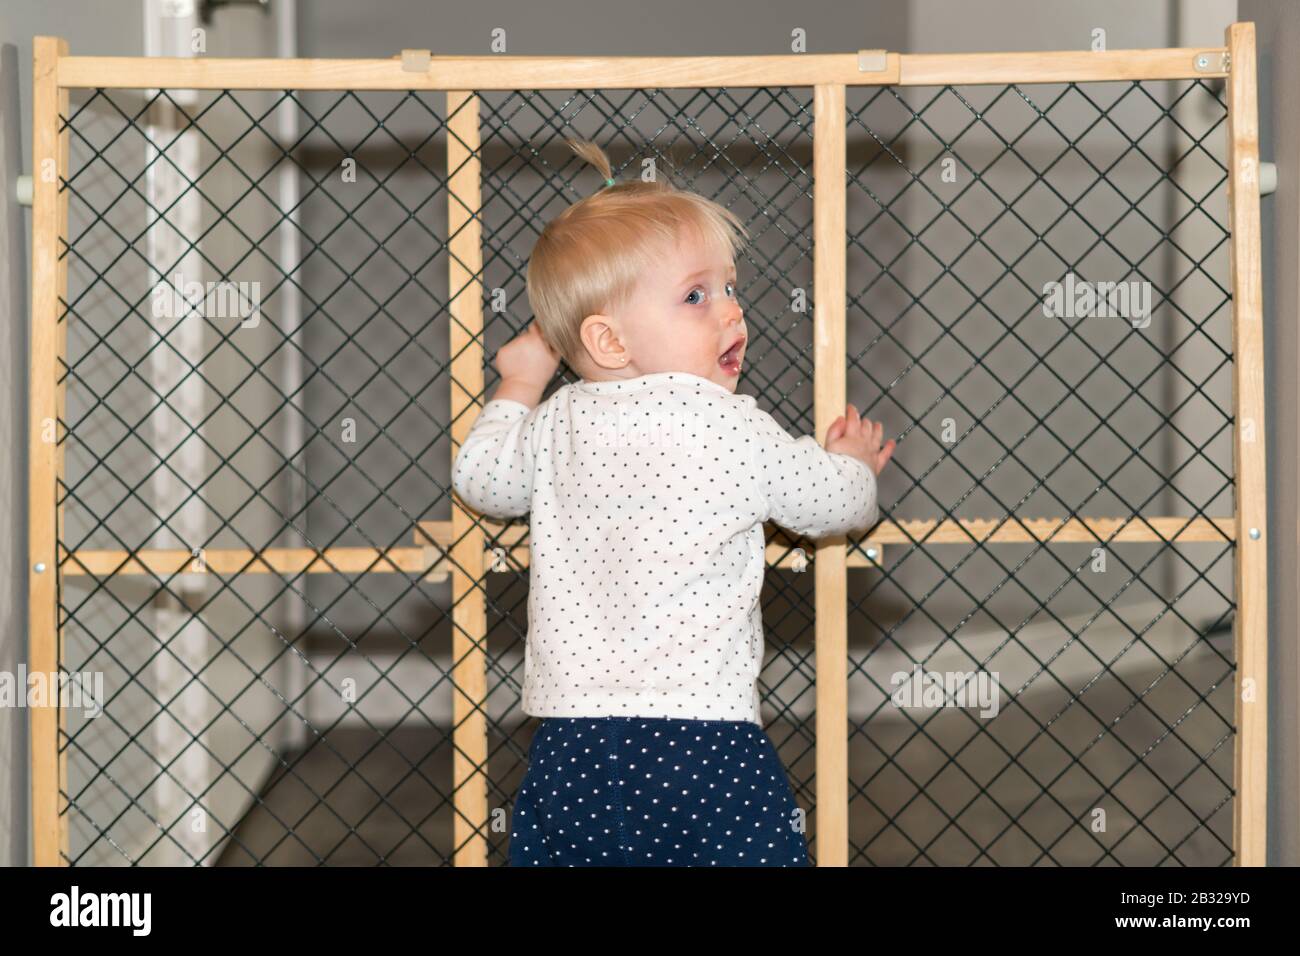 "Cute Baby Exploring Child Proof Safety Gate at Home" Stockfoto